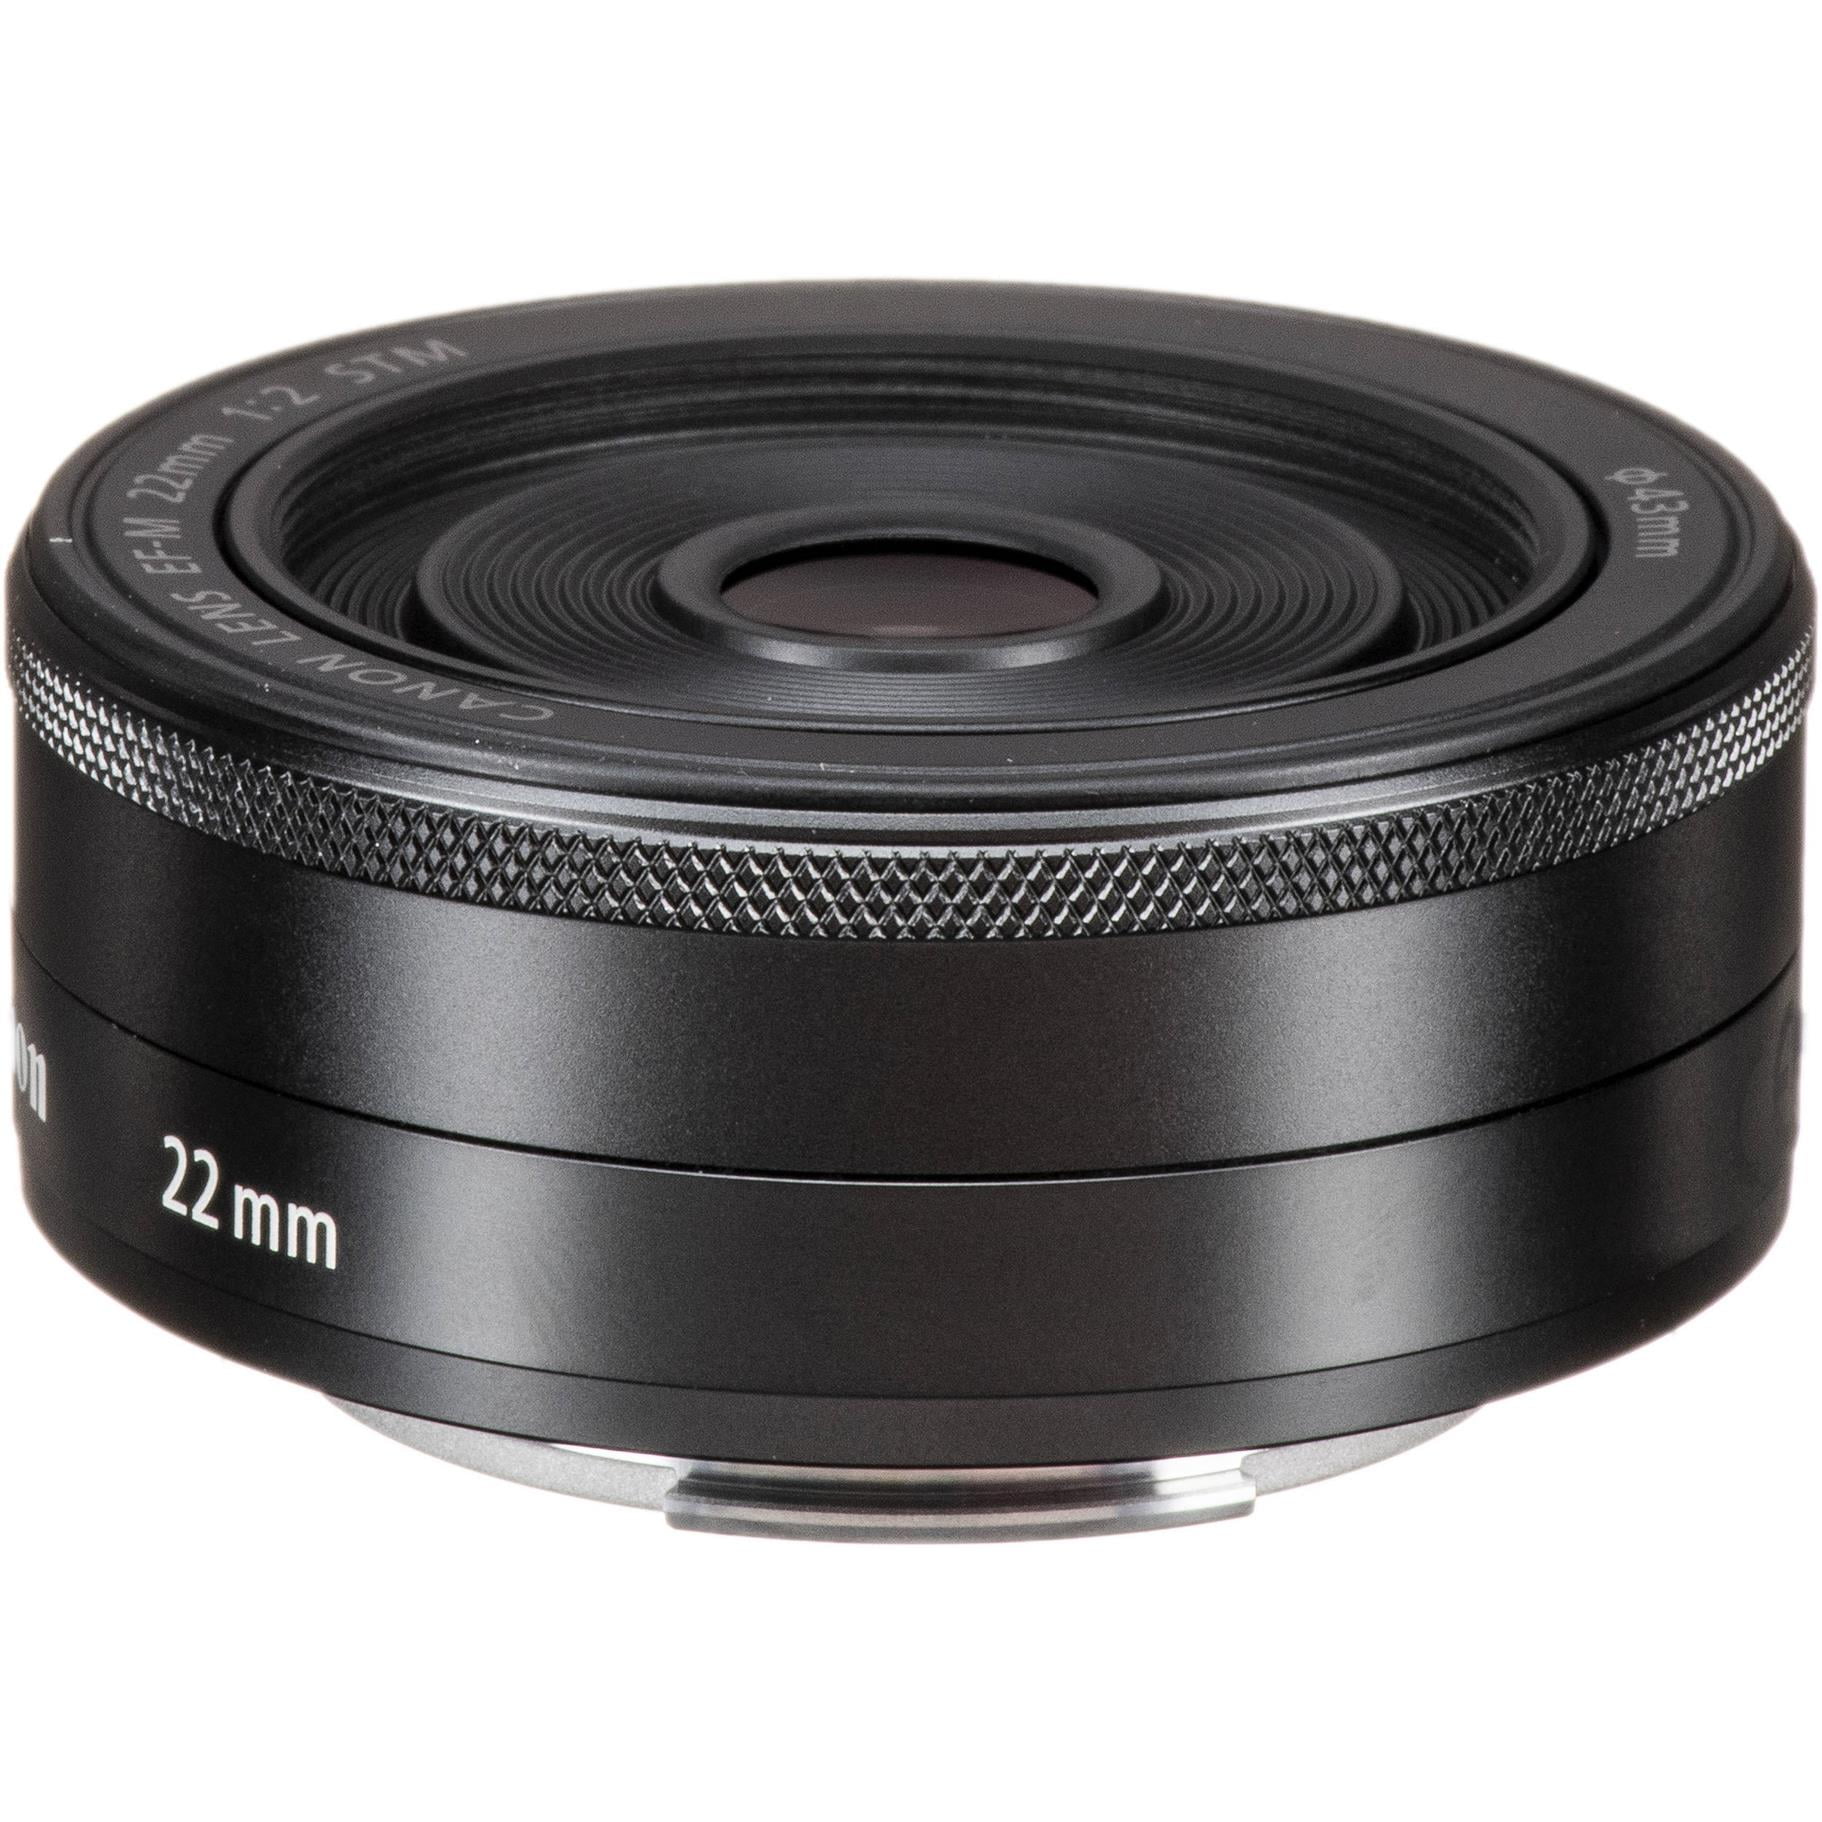 Canon EF-M 22mm f/2 STM Lens in Black (White Box) Compatible